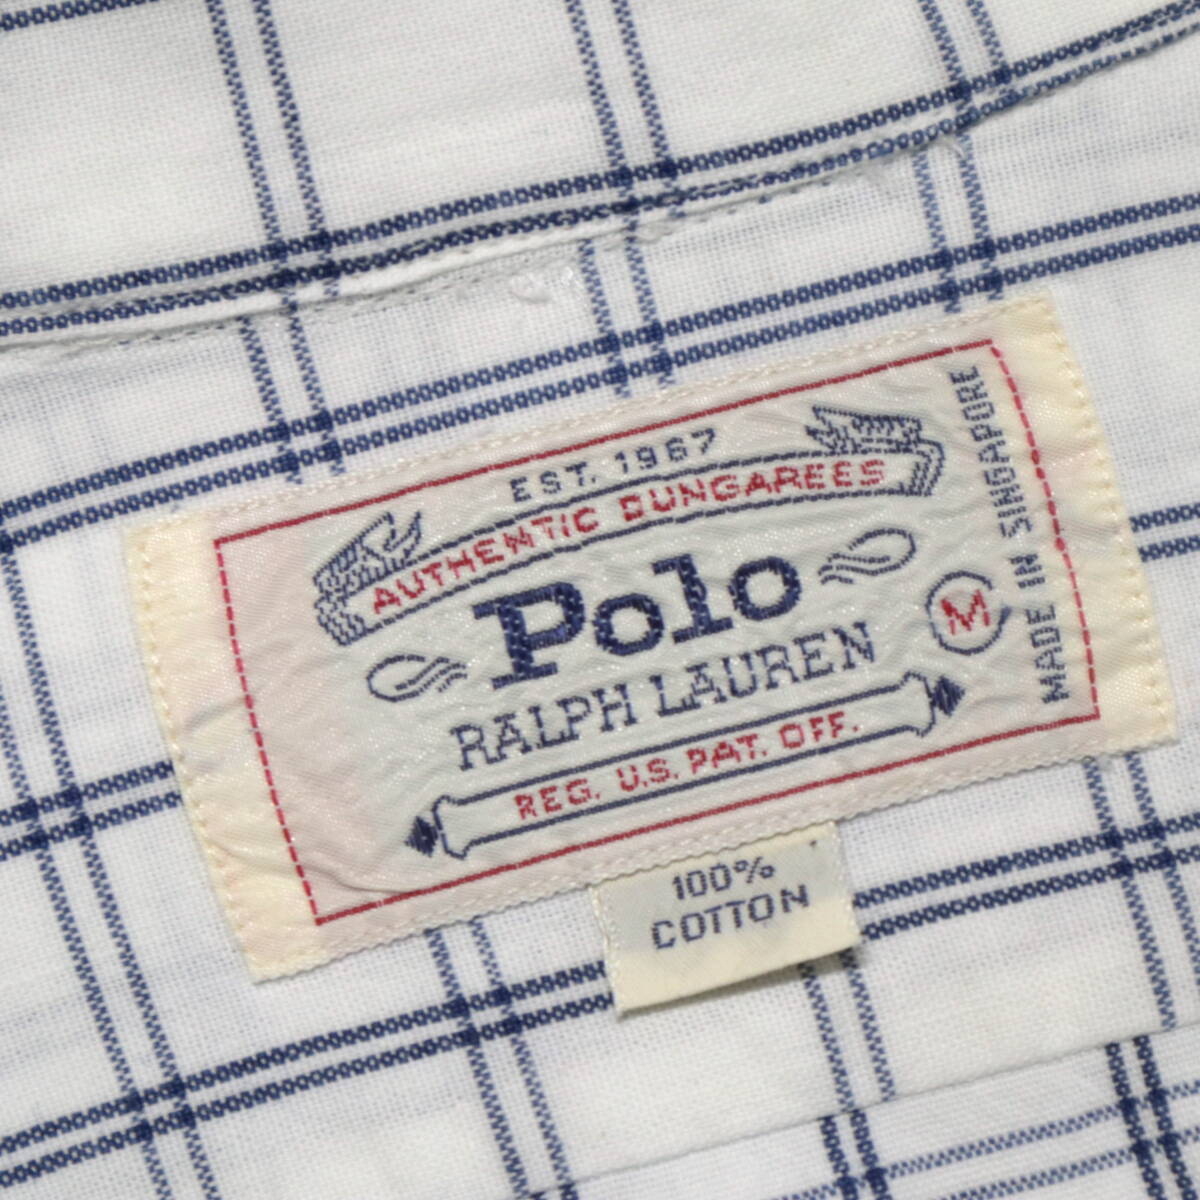 80s 90s Polo by Ralph Lauren 格子柄 フラップポケット シャツ vintage ヴィンテージ ラルフローレン patagonia L.L.Bean レーヨン_画像9